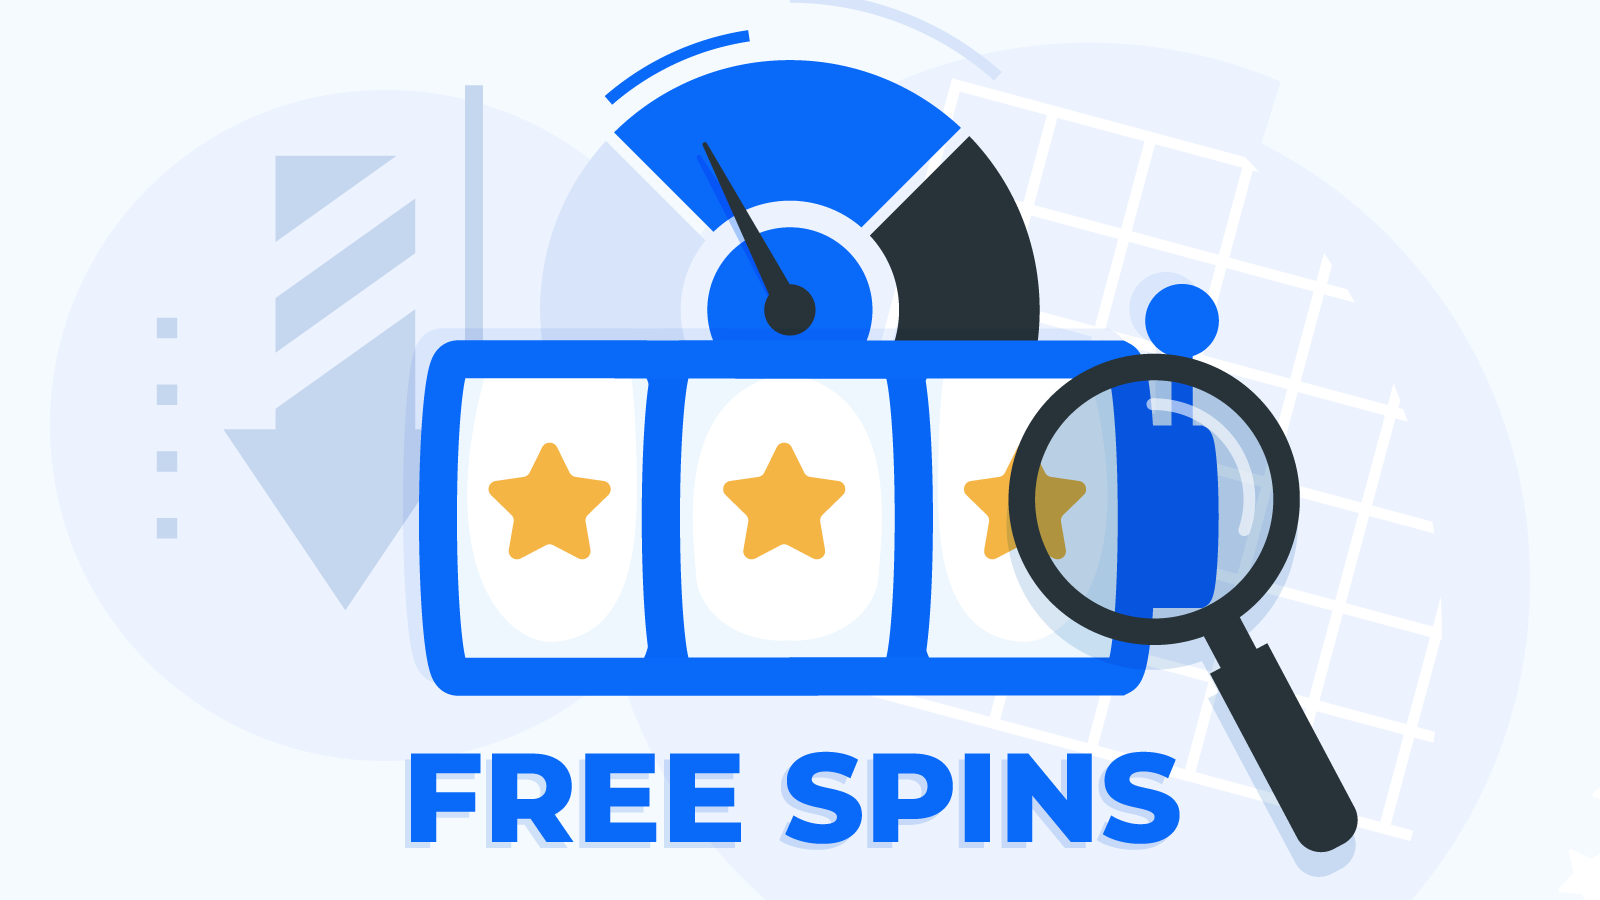 Measuring Free Spins Worth